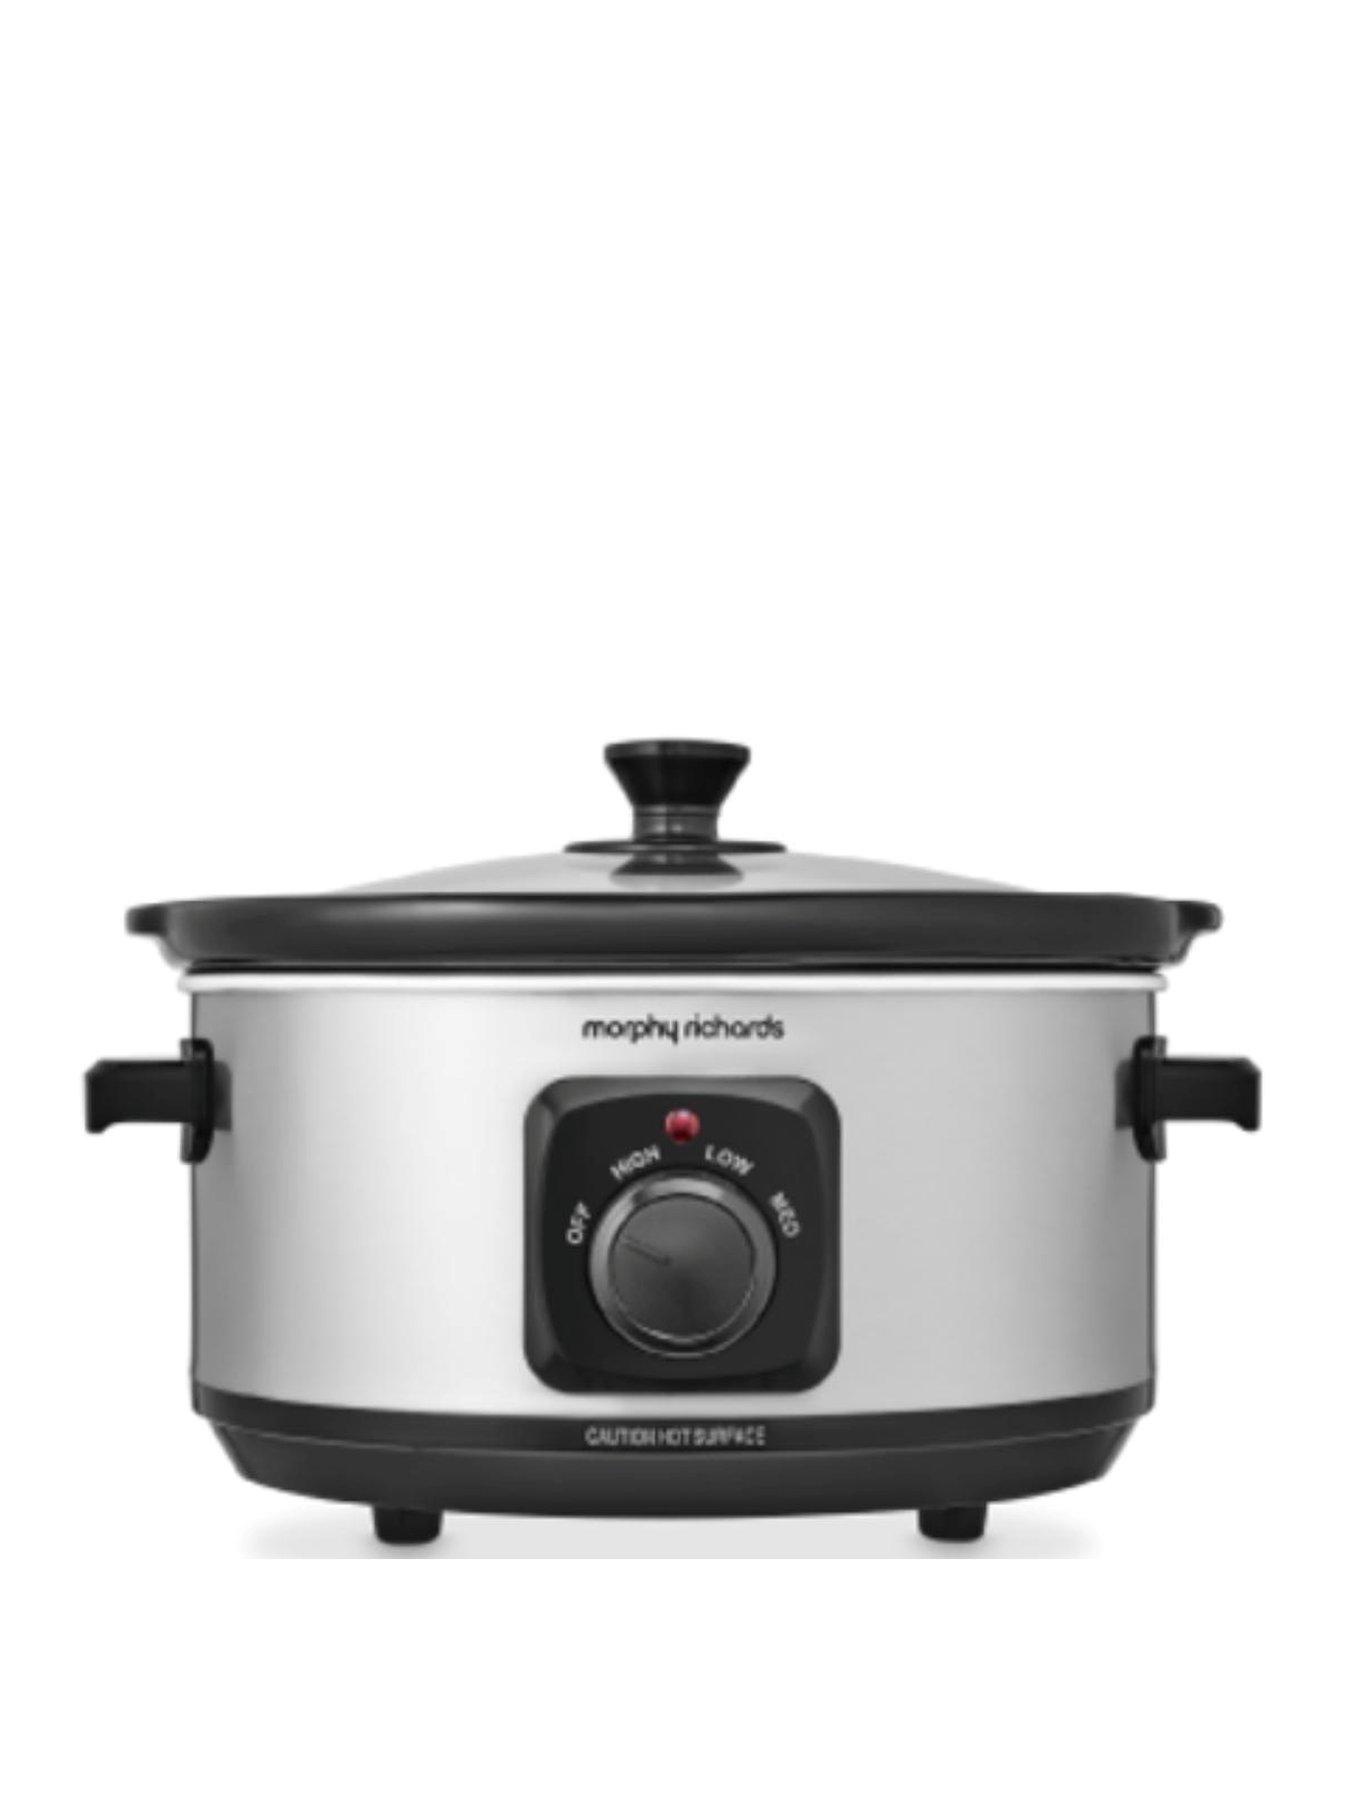 https://media.very.co.uk/i/very/VABW9_SQ1_0000000088_NO_COLOR_SLf/morphy-richards-35l-460017-slow-cooker-brushed-stainless-steel.jpg?$180x240_retinamobilex2$